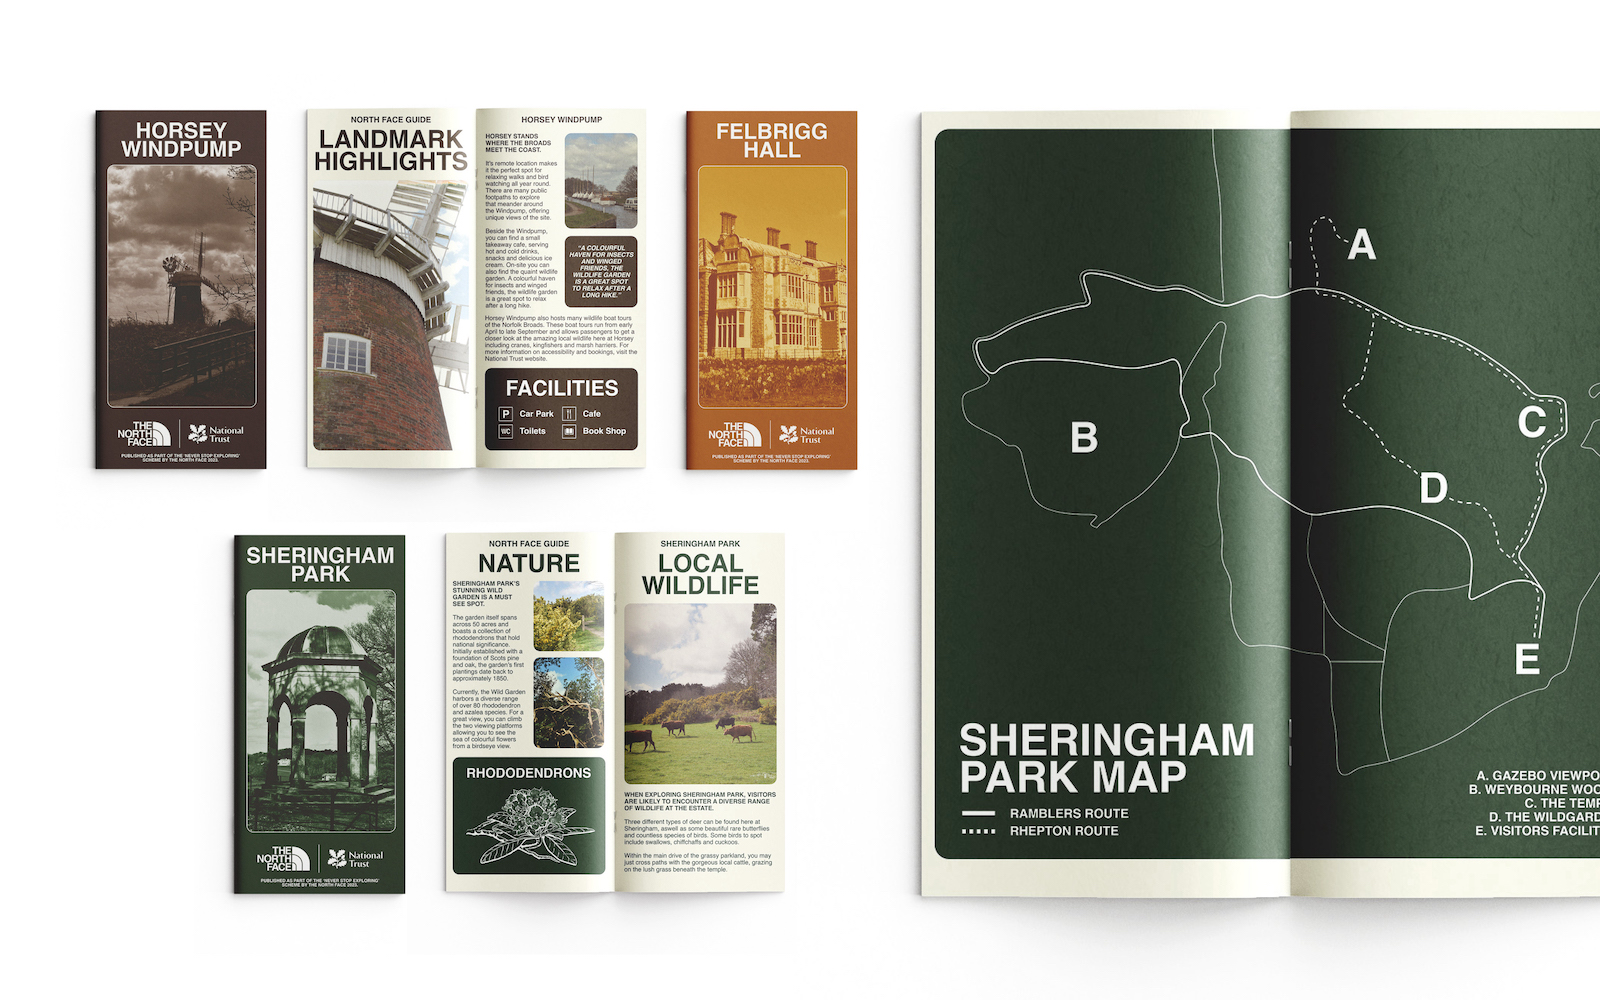 Photos of informative park guides designed by Elle Hart.